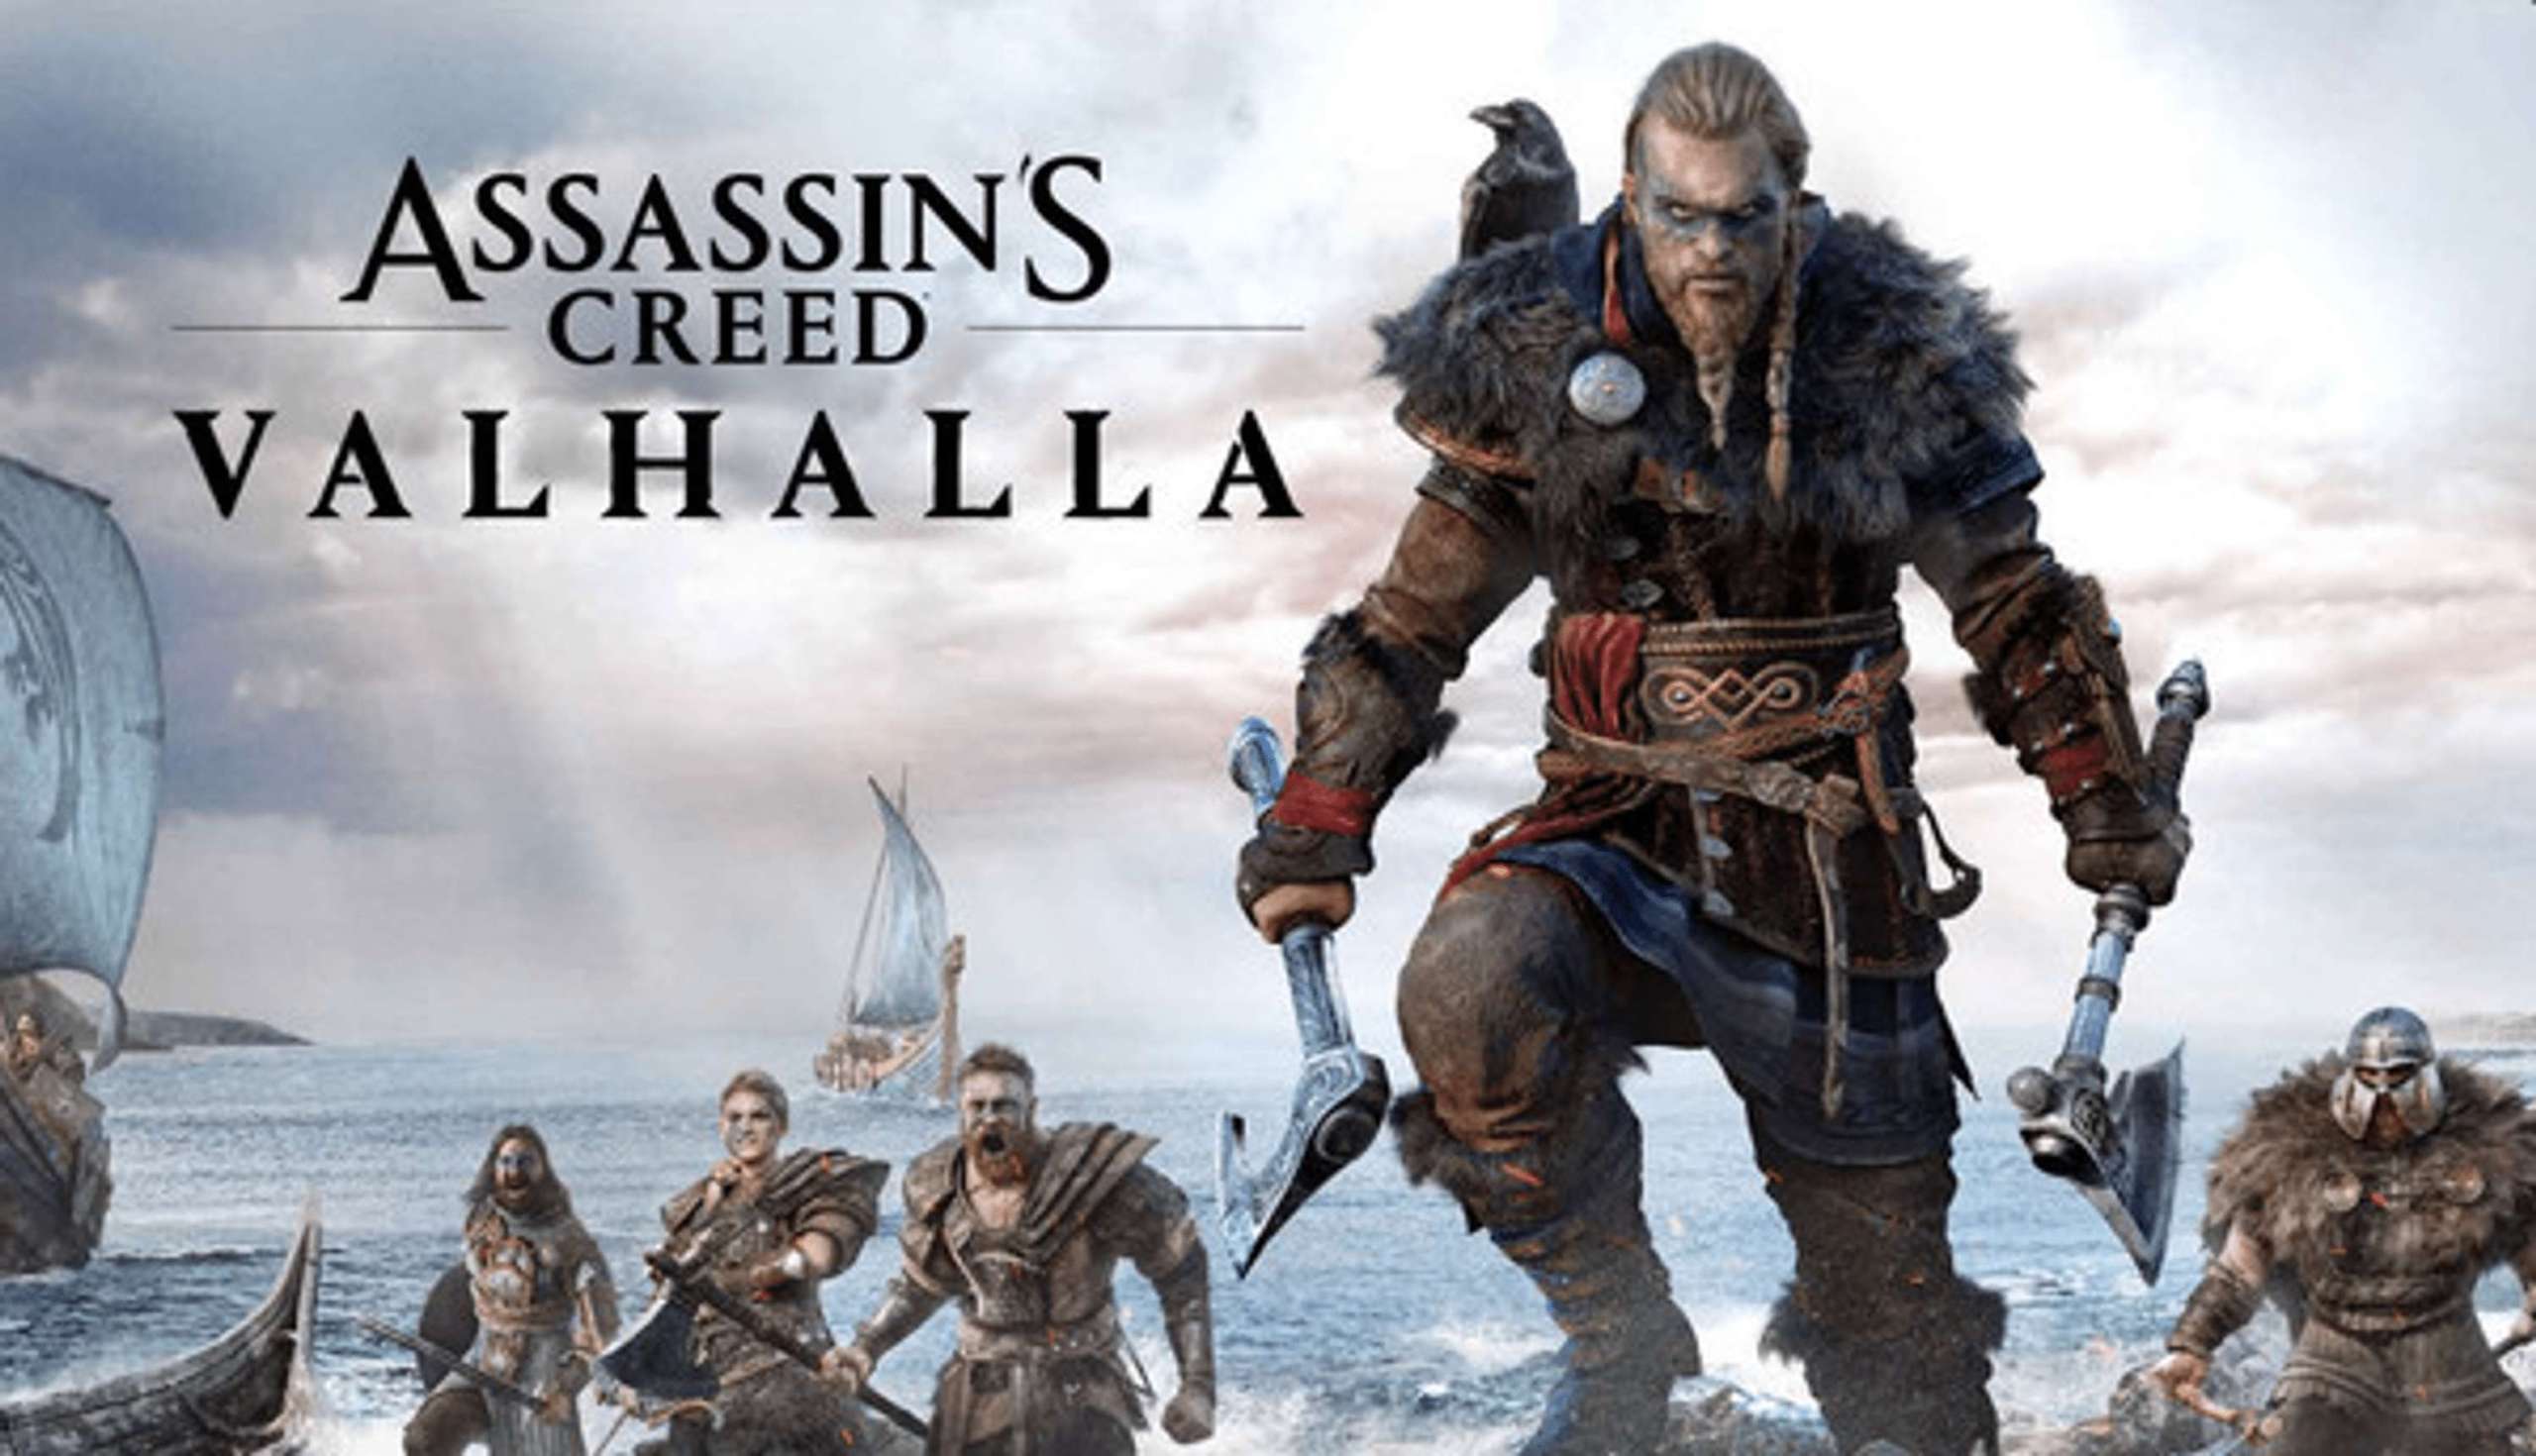 Forgotten Saga DLC For Assassin’s Creed Valhalla Gets Some Fresh Gameplay Footage From Ubisoft